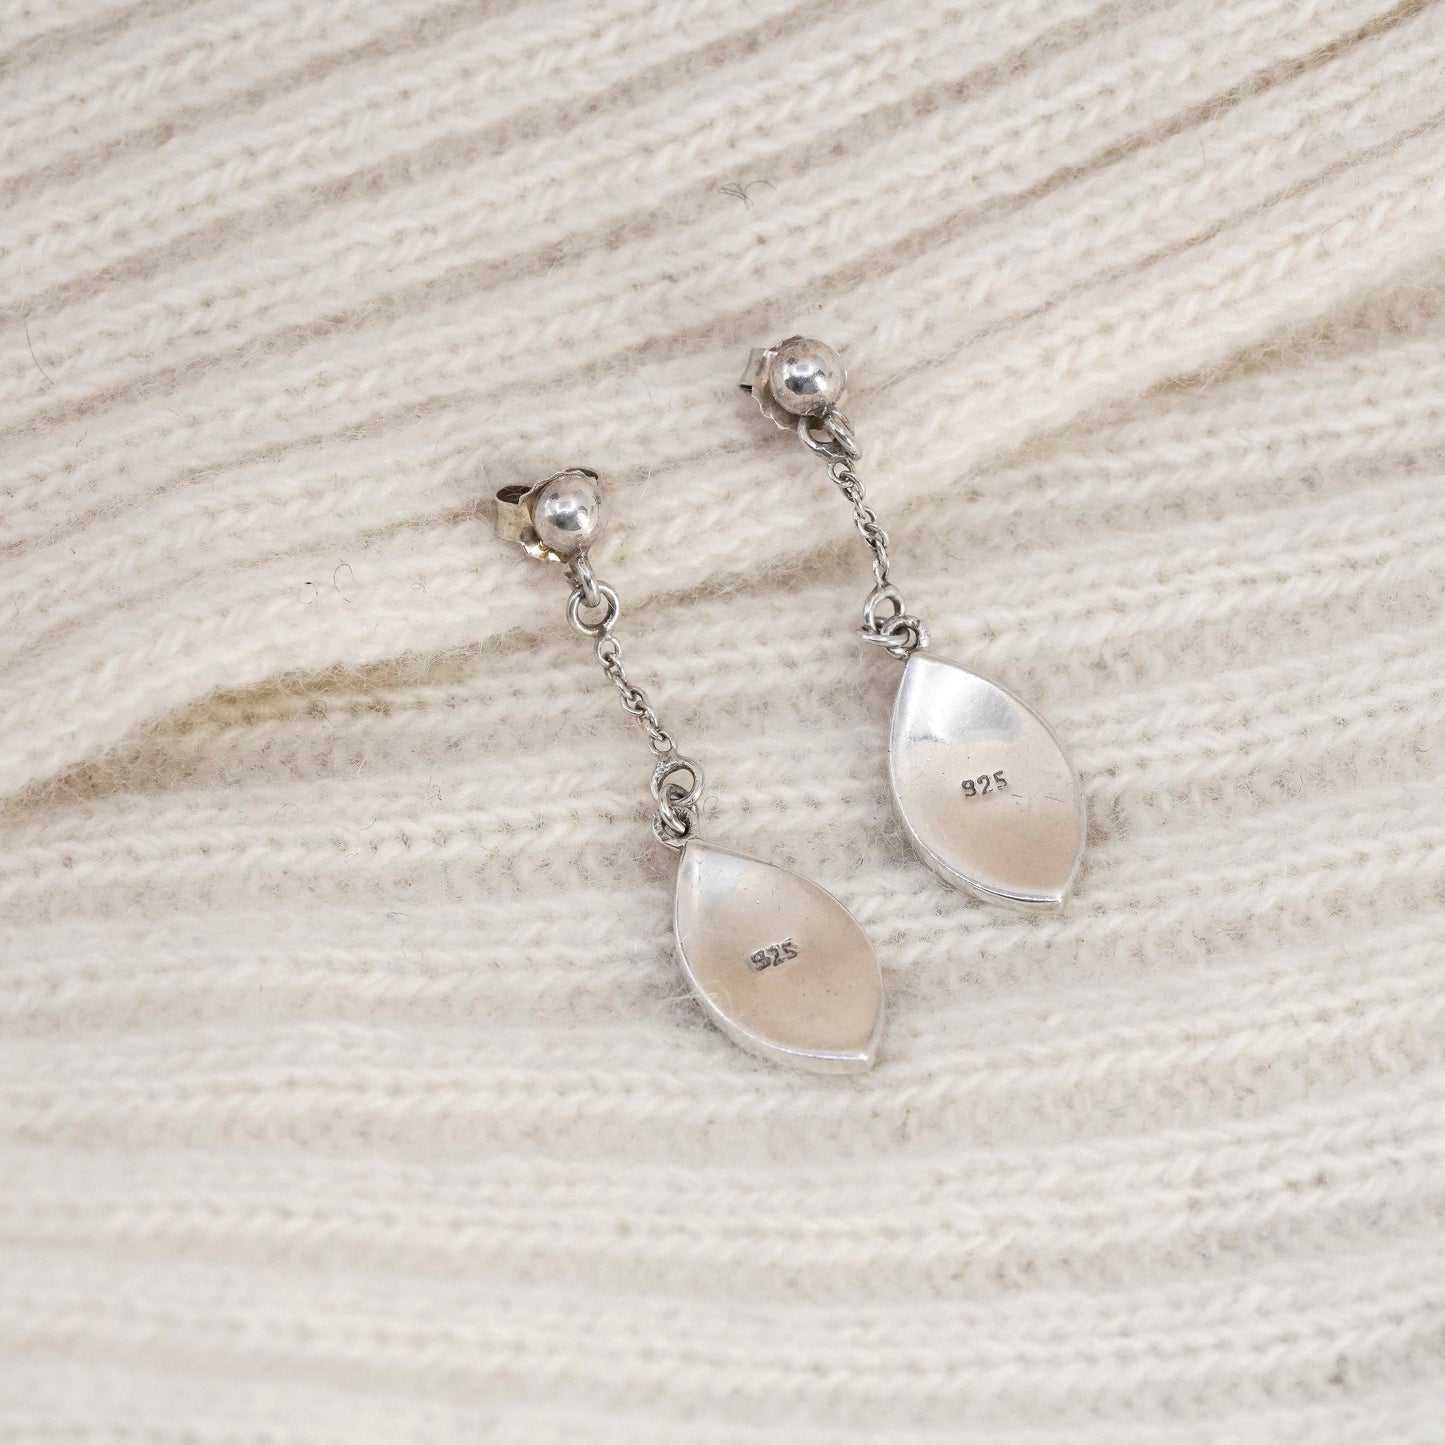 Vintage sterling 925 silver drop earrings, 925 leaf with Mother of pearl inlay